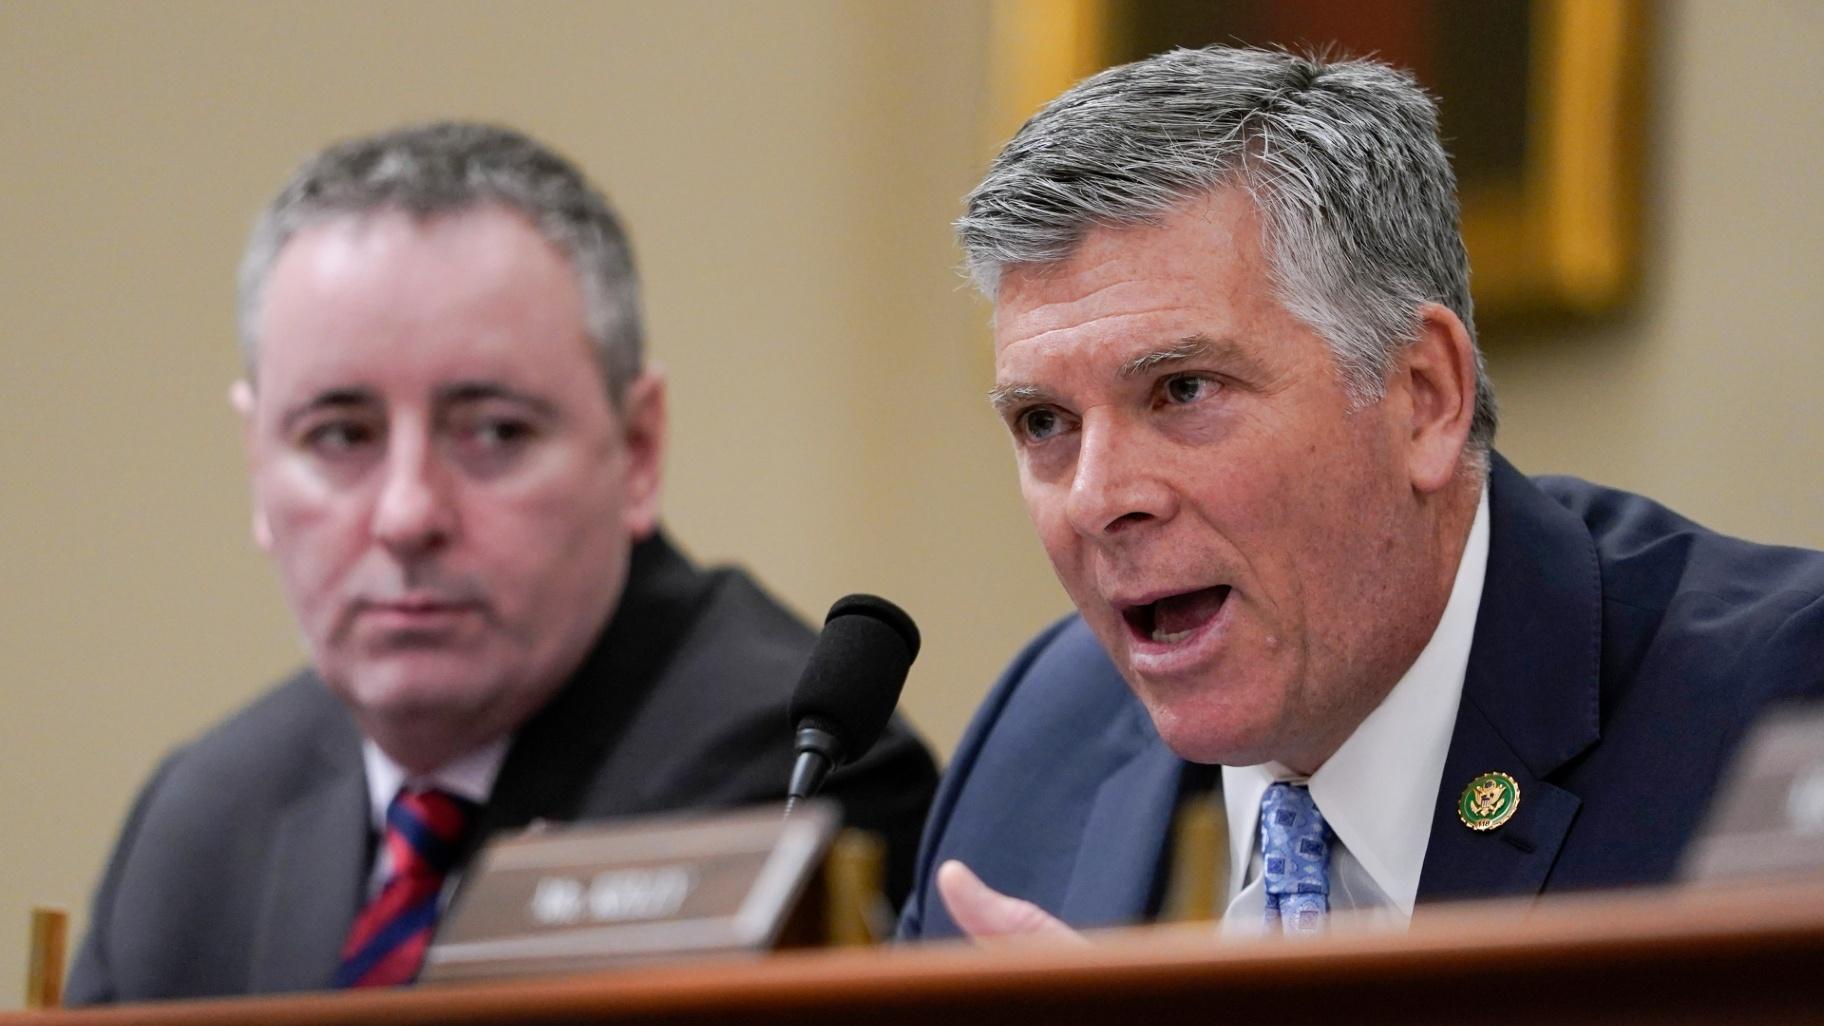 Rep. Darin LaHood, R-Ill., speaks during the House Select Committee on Intelligence annual open hearing on worldwide threats at the Capitol in Washington, Thursday, March 9, 2023. Rep. Brian Fitzpatrick, R-Pa., is left. (AP Photo / Carolyn Kaster)